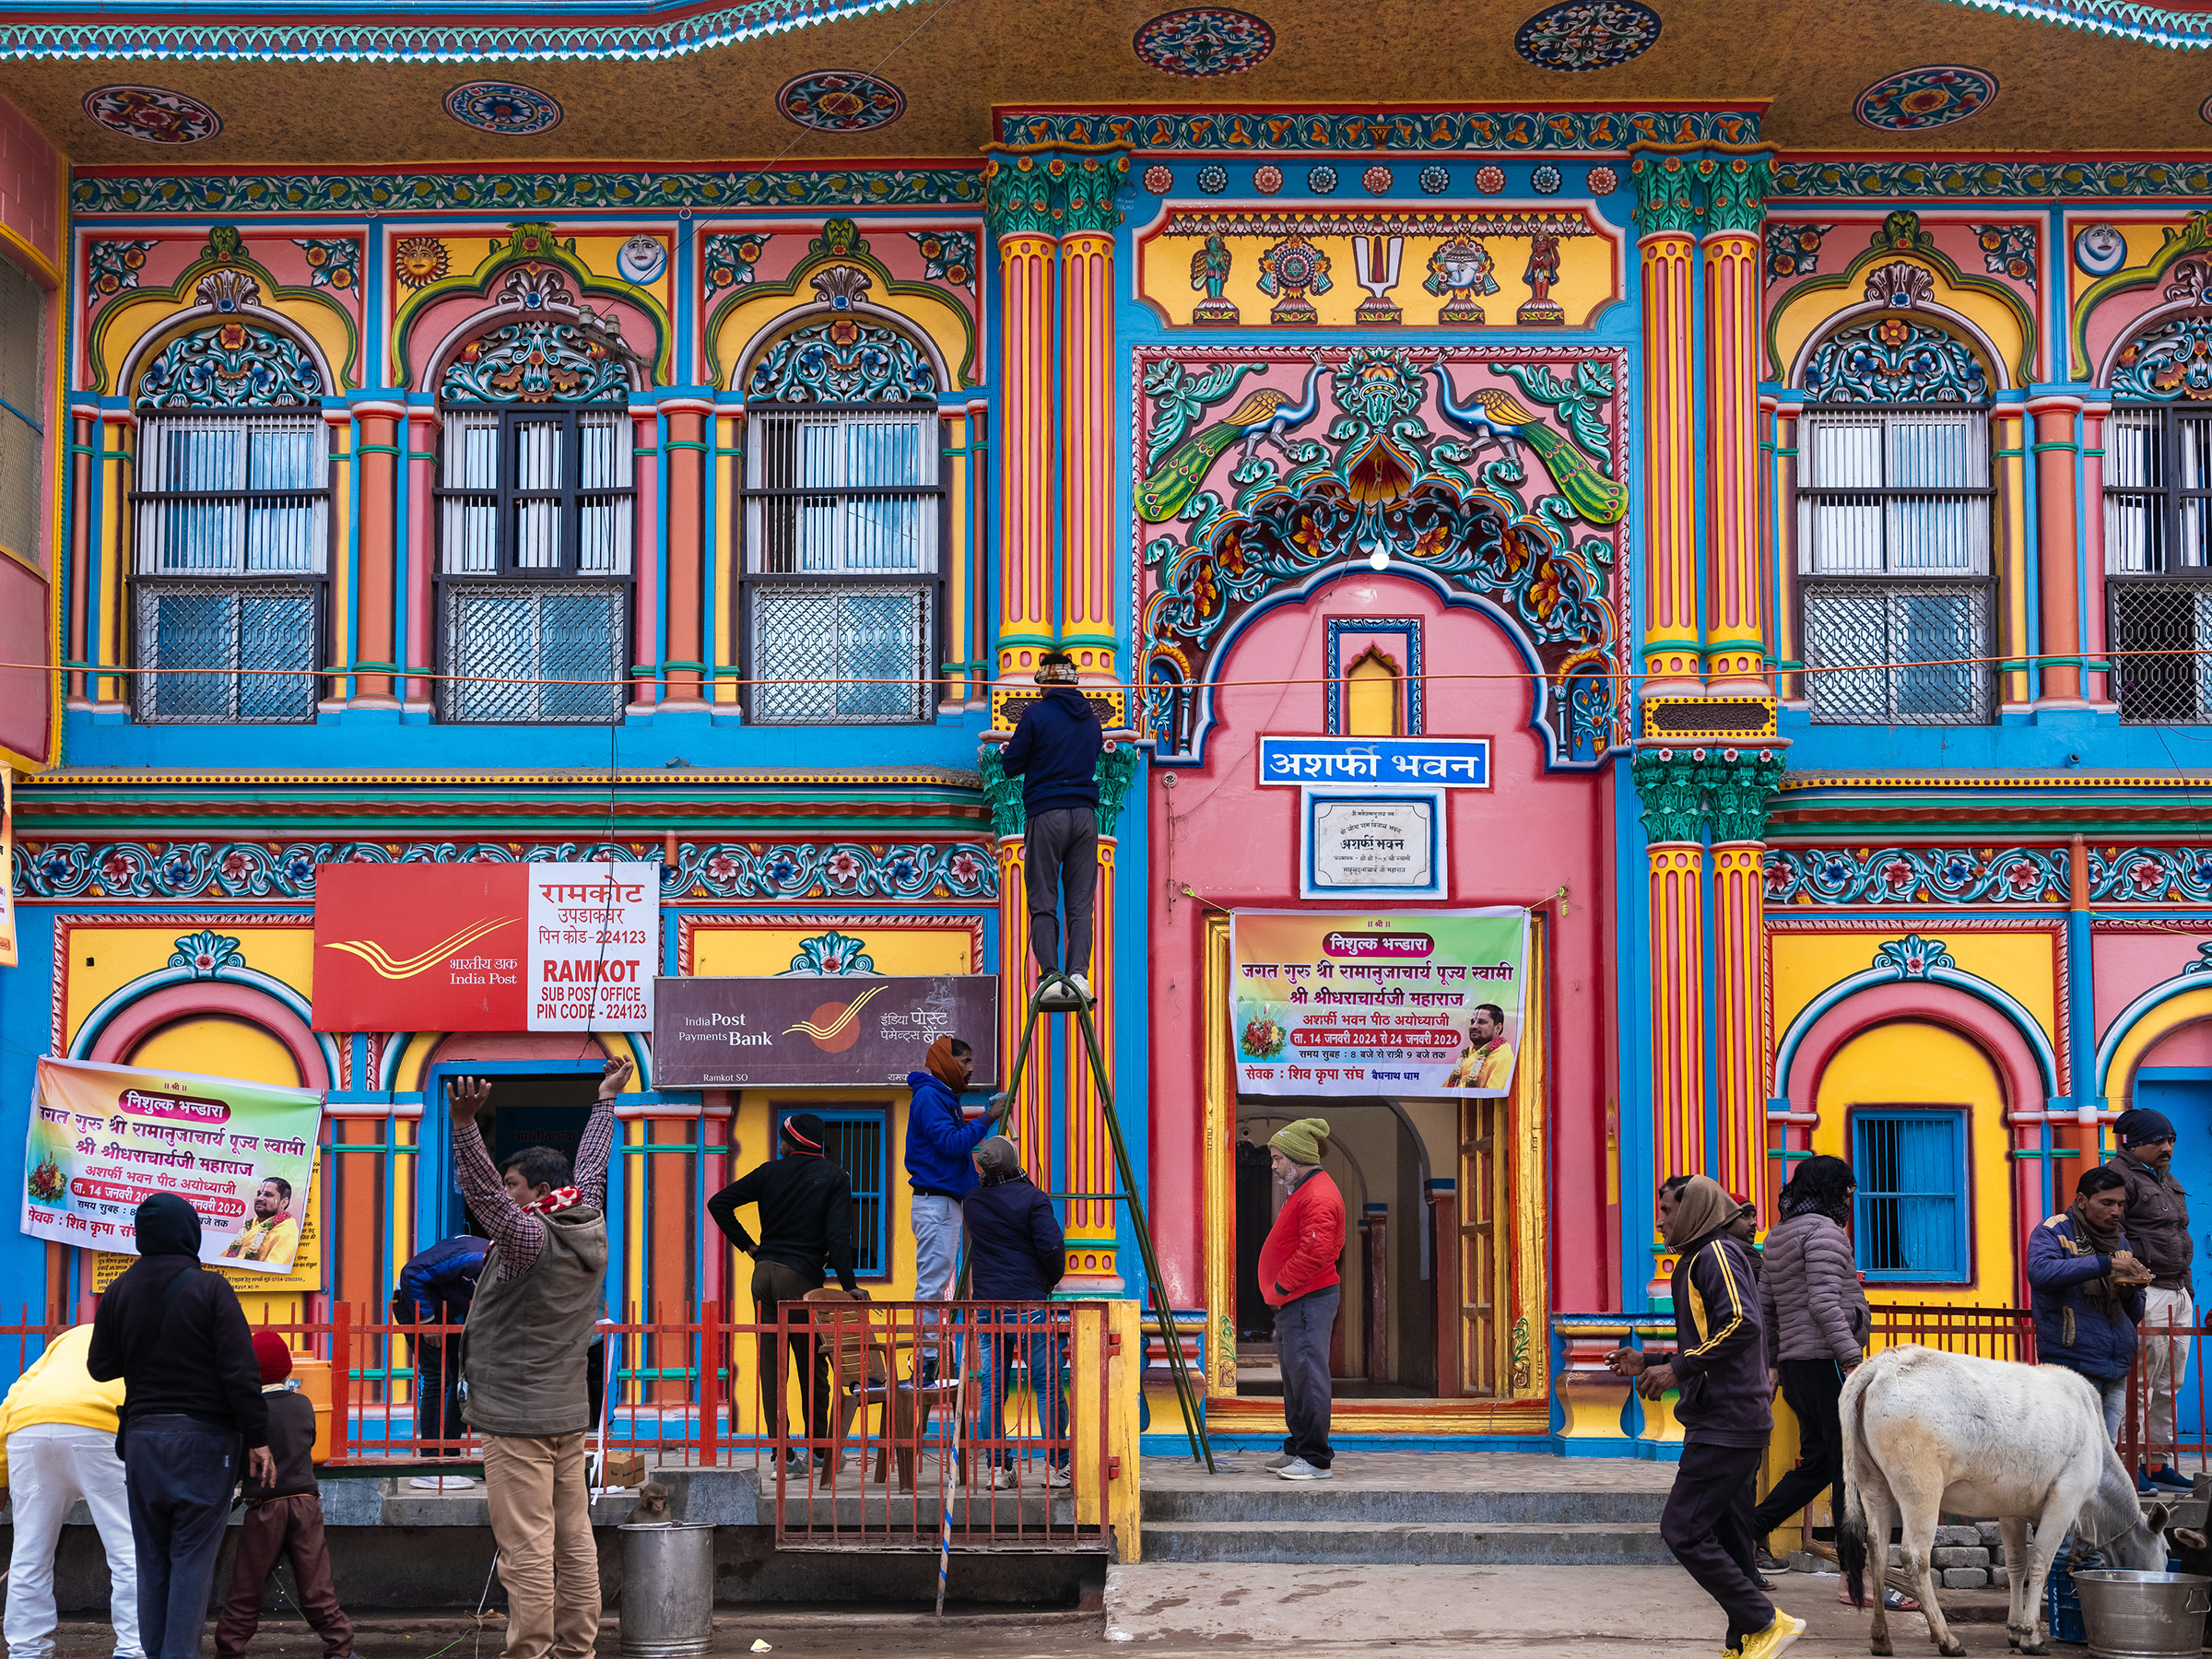 Heritage buildings in Ayodhya, such as the nearly century old Asharfi Bhawan, are getting a new coat of paint on Jan. 17. The Asharfi Bhawan is a temple and pilgrim resthouse but is also the most colourful post office in Ayodhya.